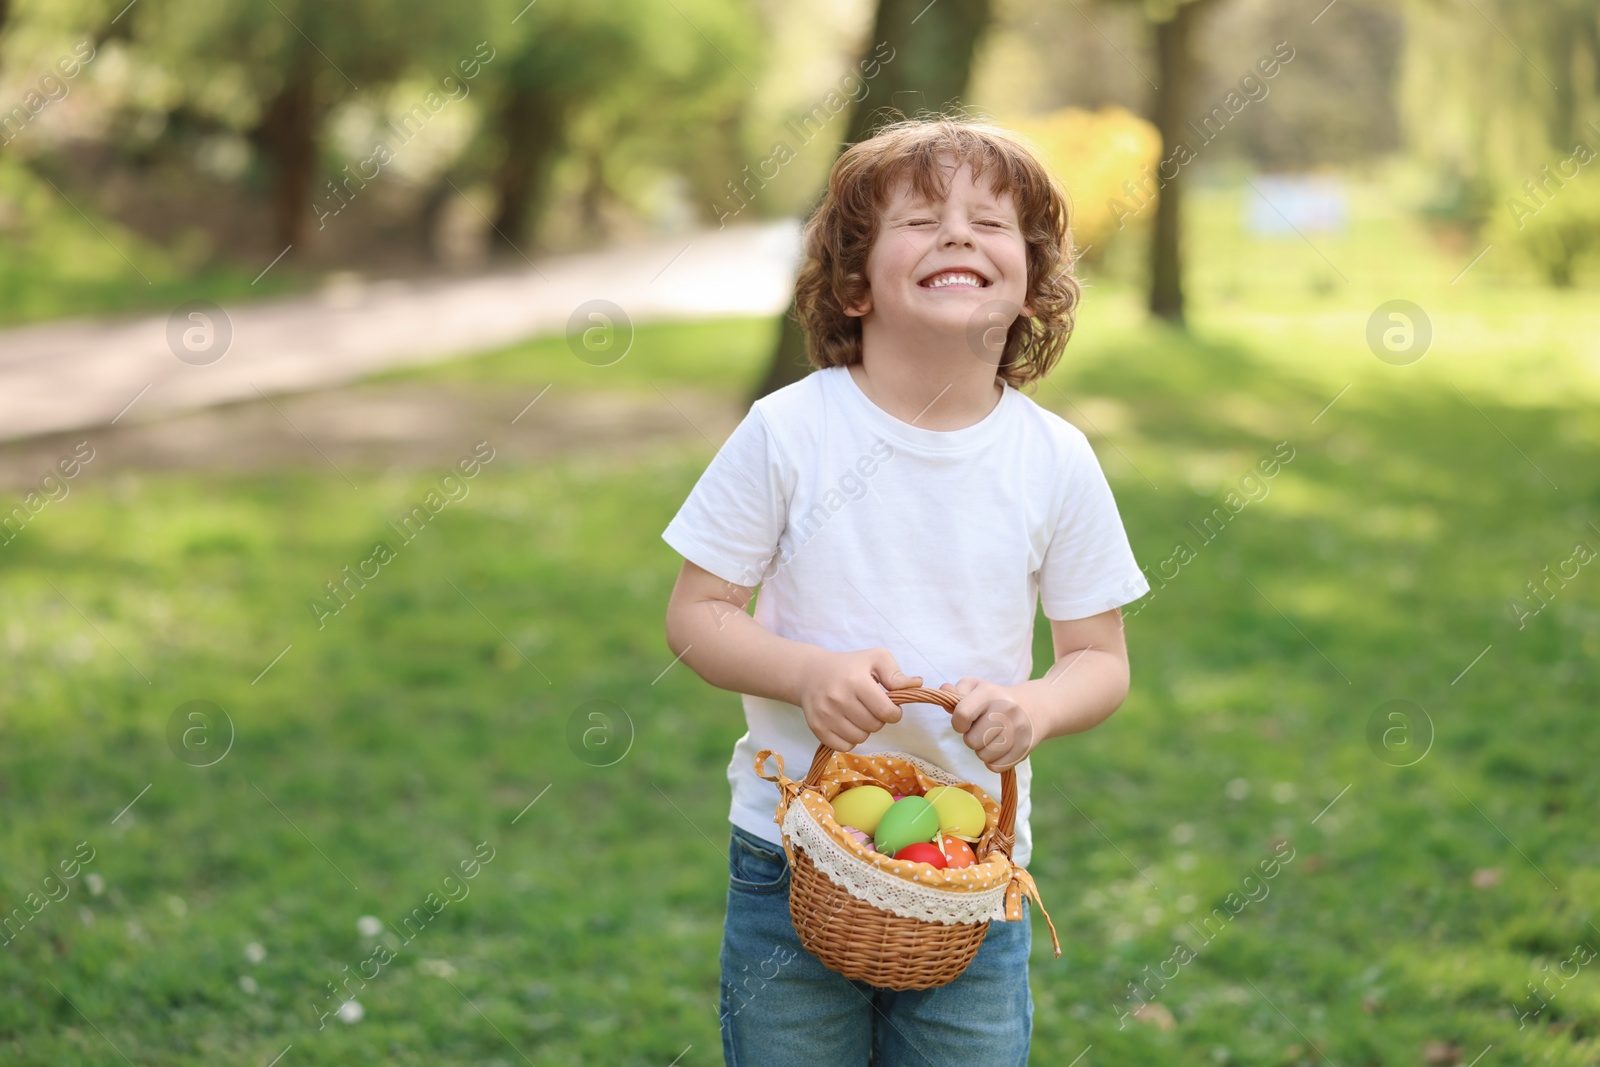 Photo of Easter celebration. Cute little boy holding wicker basket with painted eggs outdoors